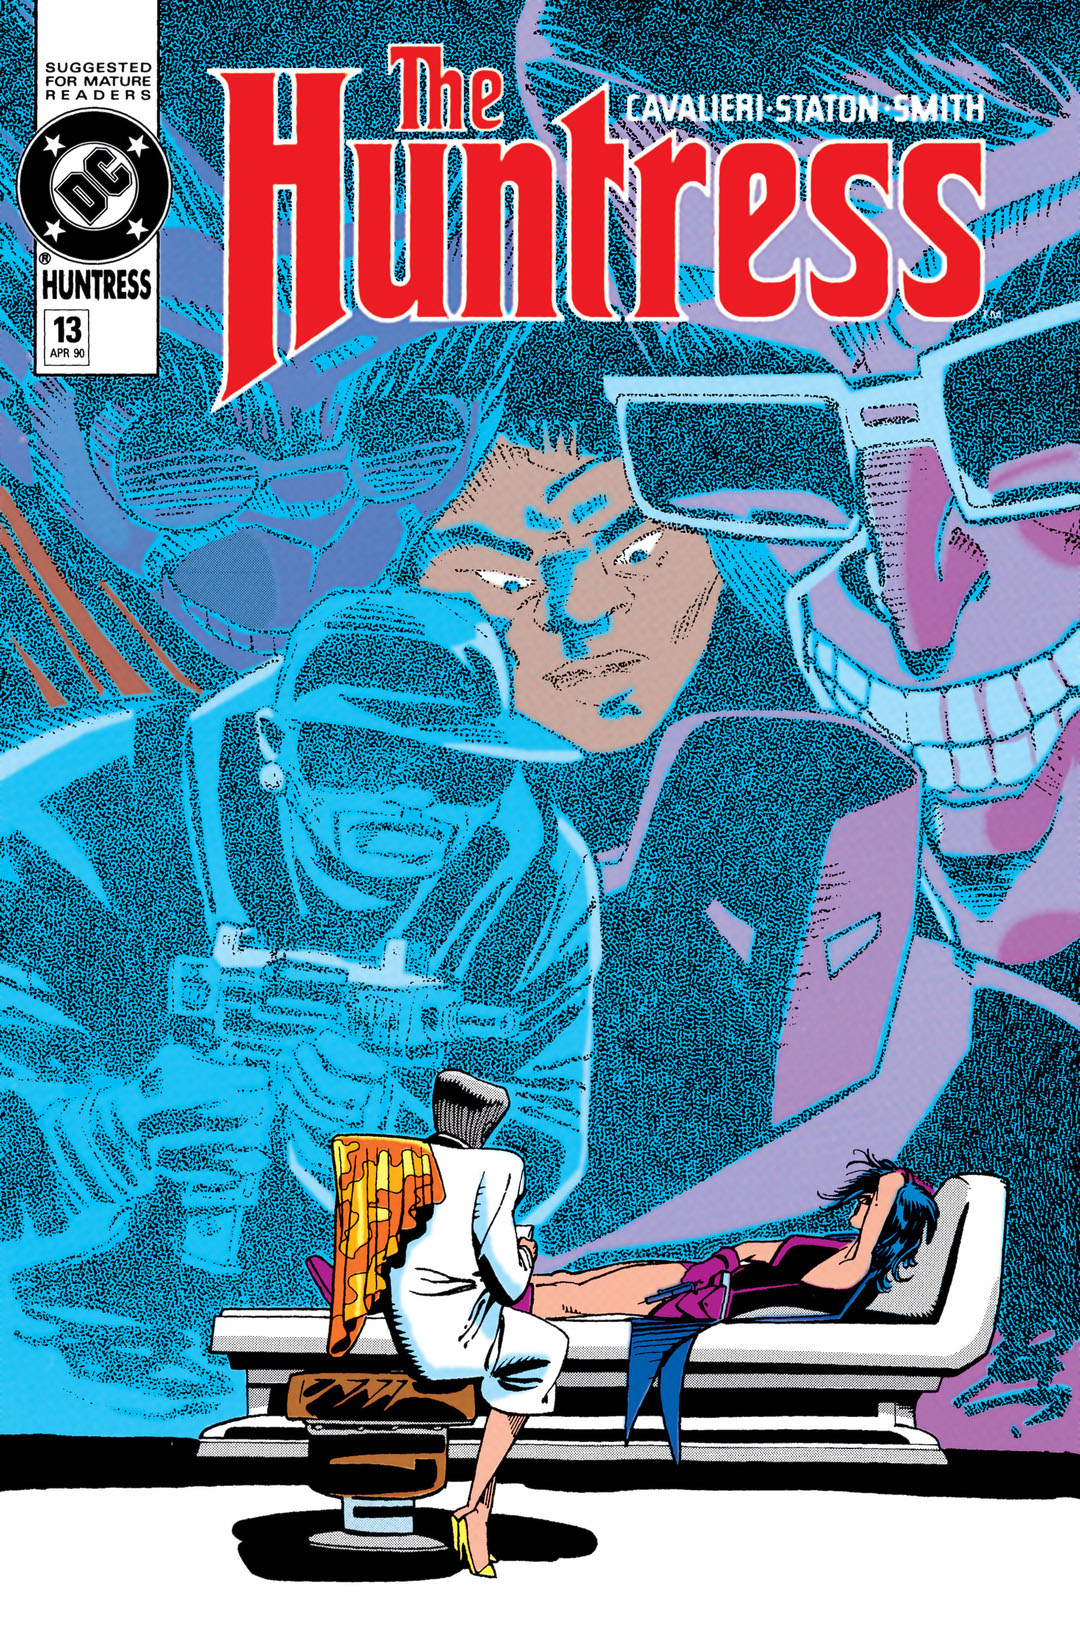 The Huntress (1989-1990) #13 preview images